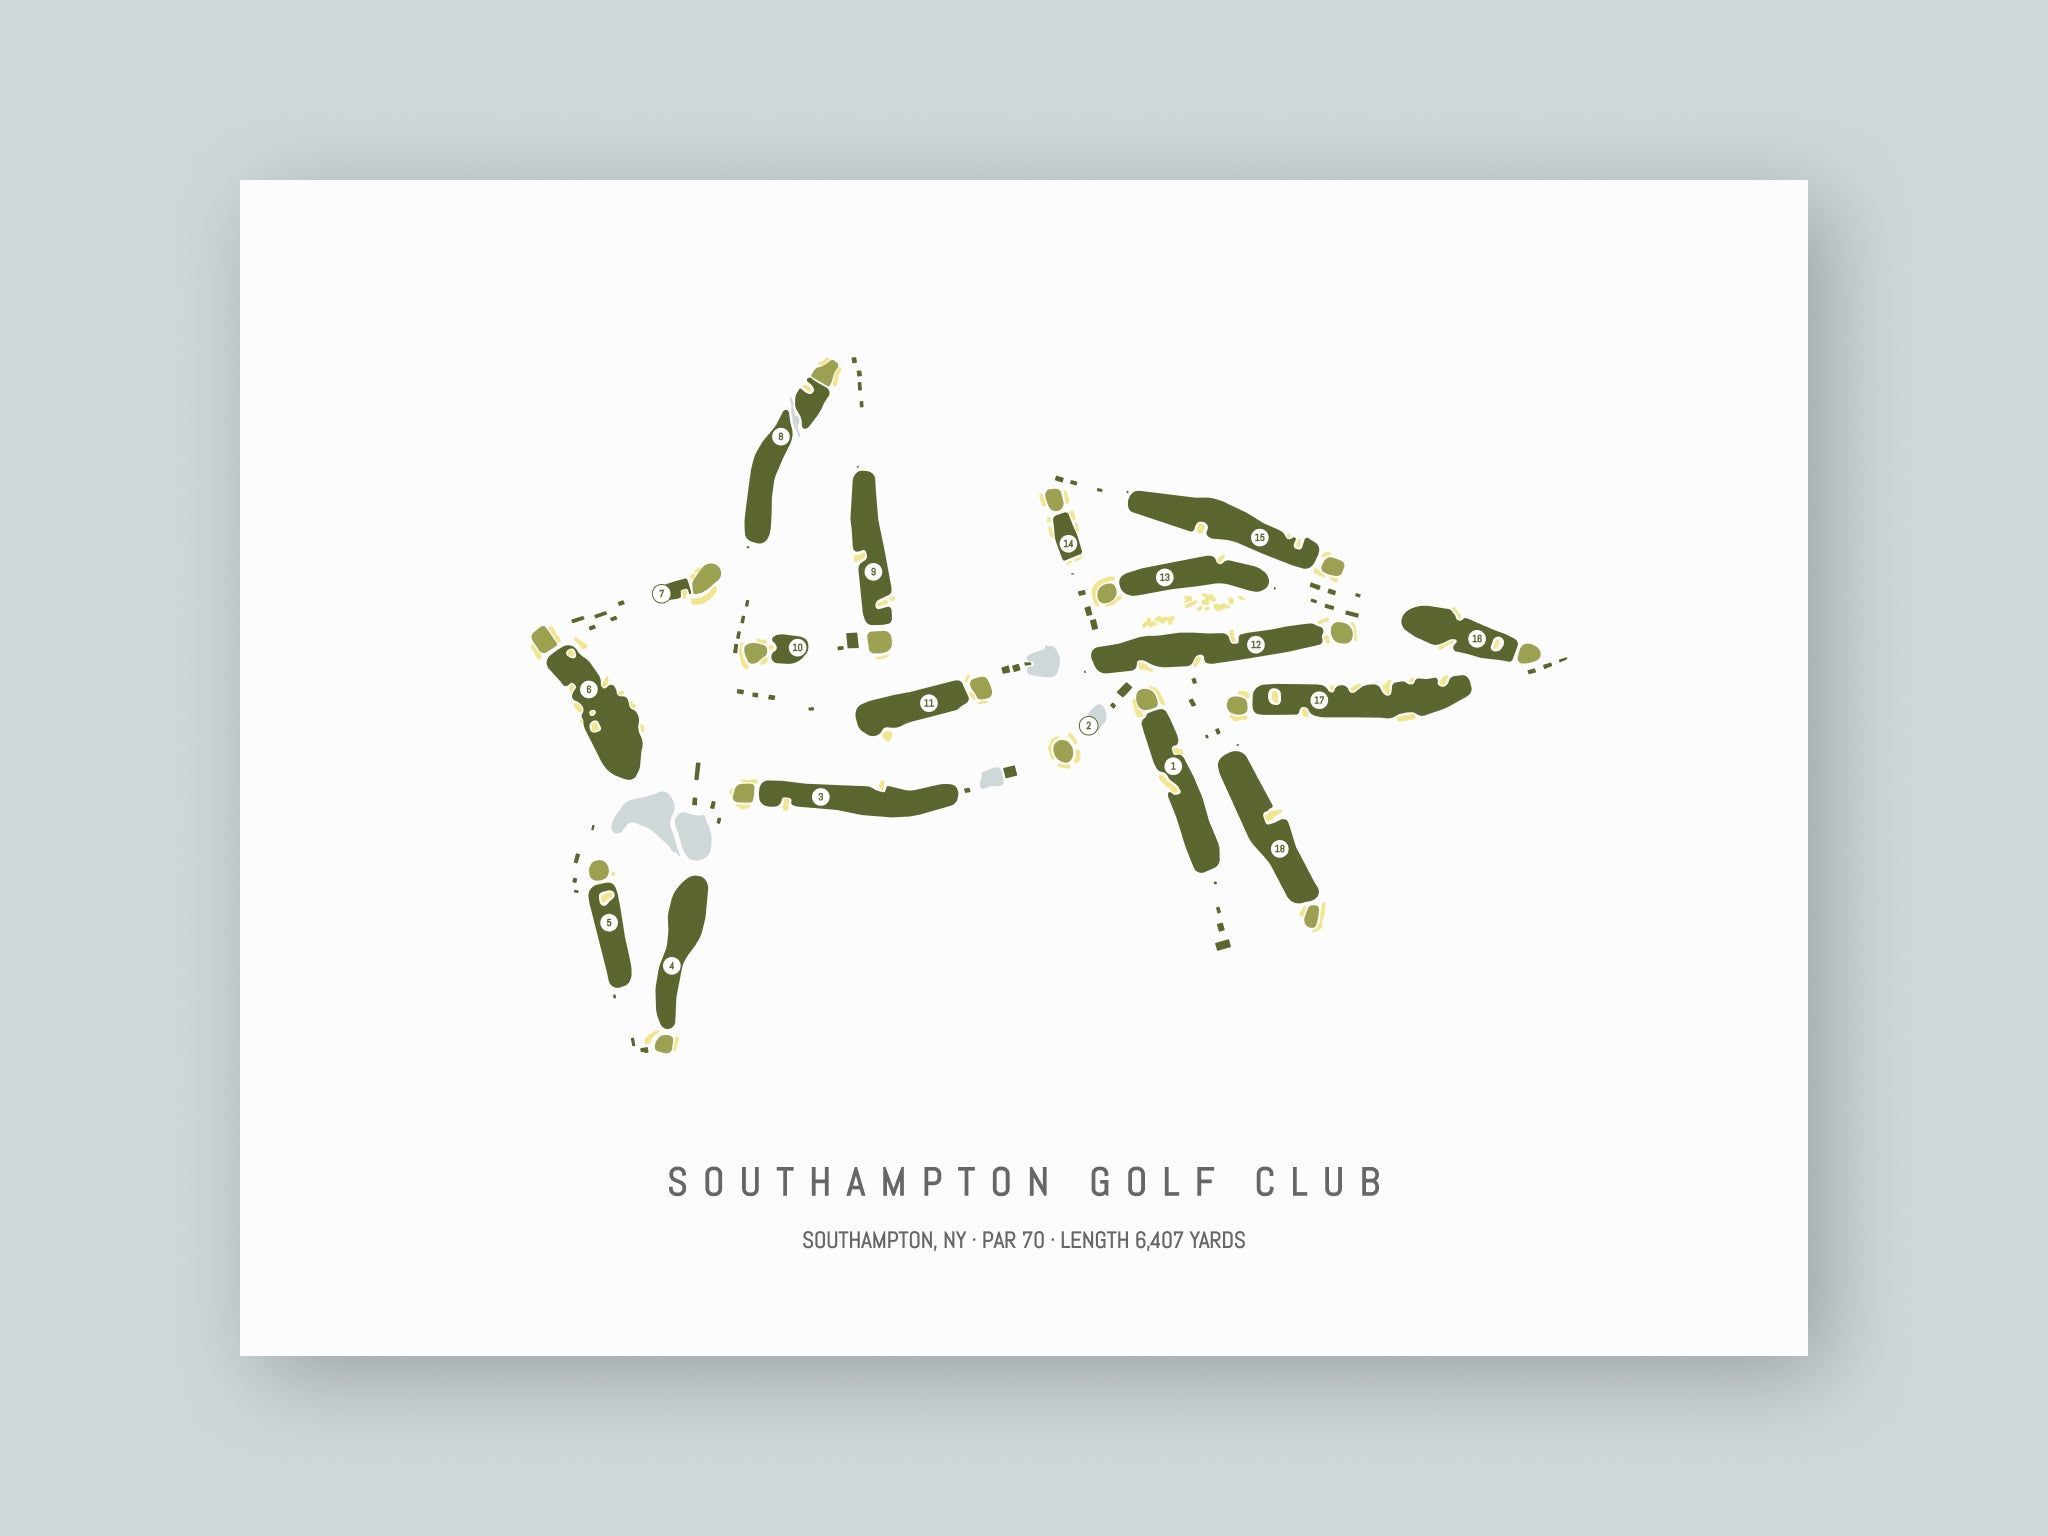 Southampton-Golf-Club-NY--Unframed-24x18-With-Hole-Numbers